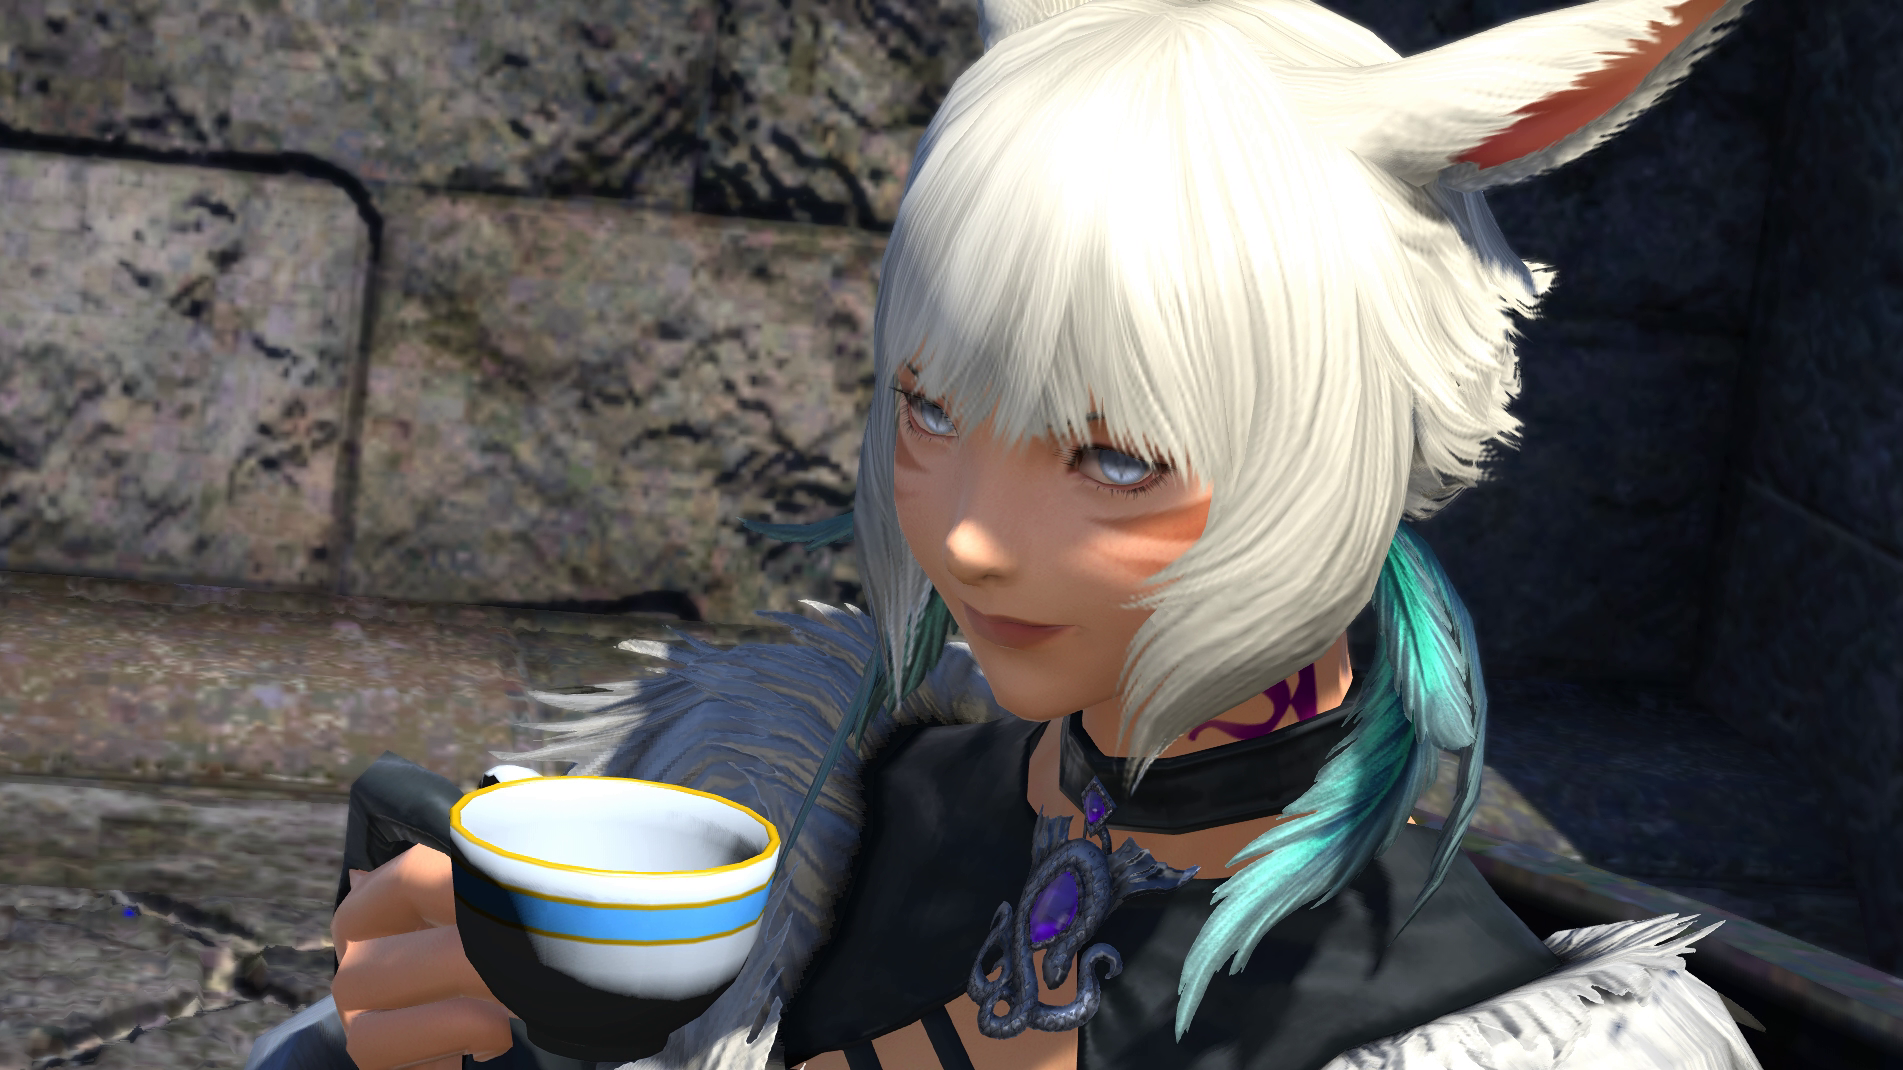 Ffxiv 5 3 Inspires Hope Closing One Of Final Fantasy S Greatest Stories Gam...